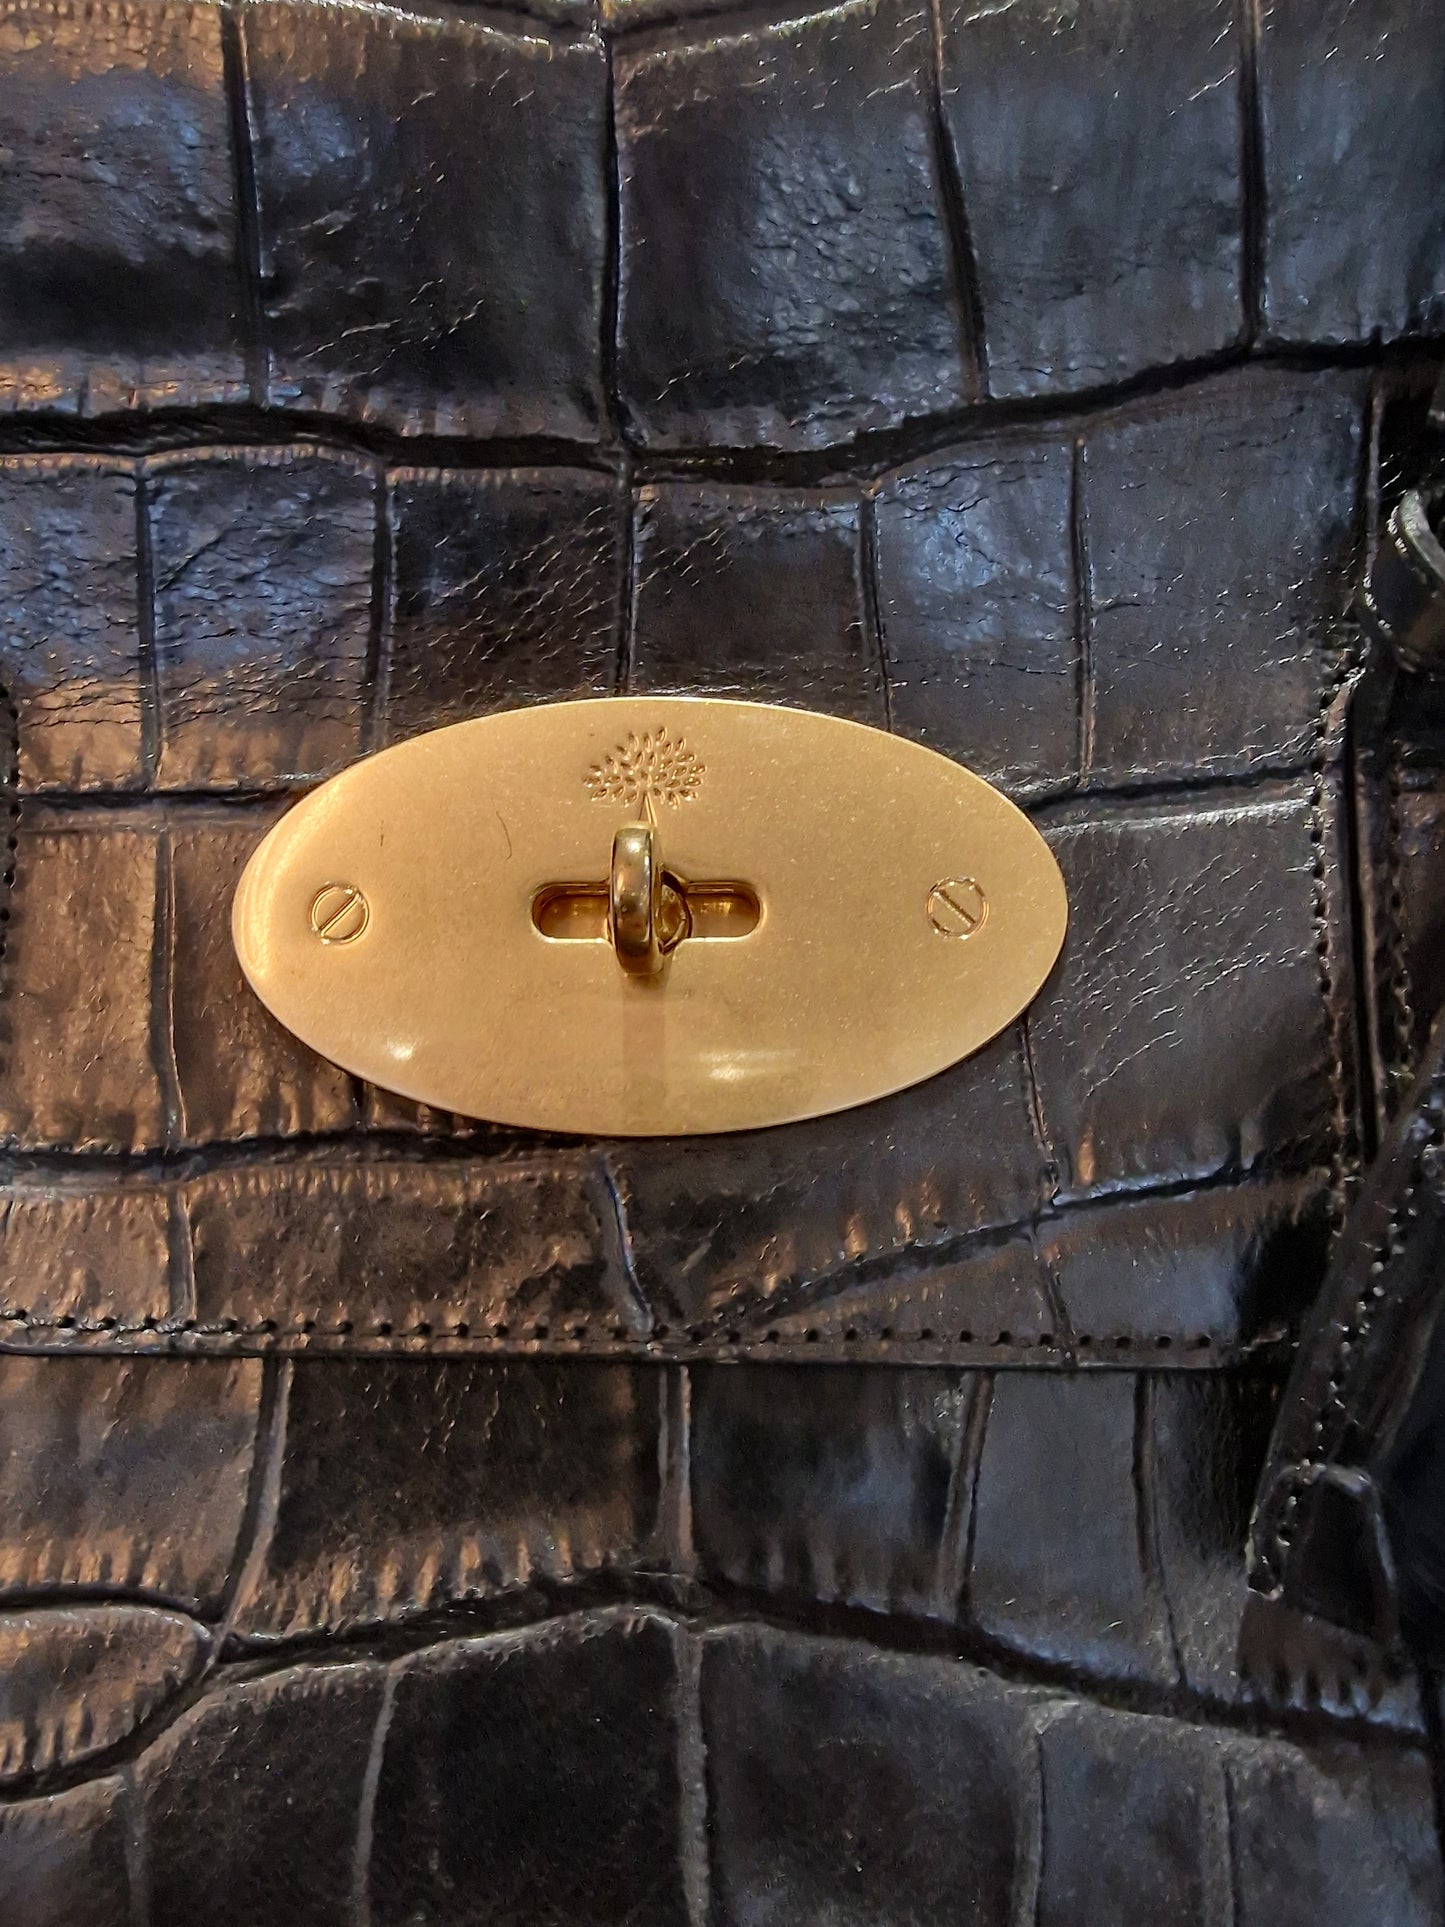 Mulberry Bayswater Black 'croc' effect leather bag